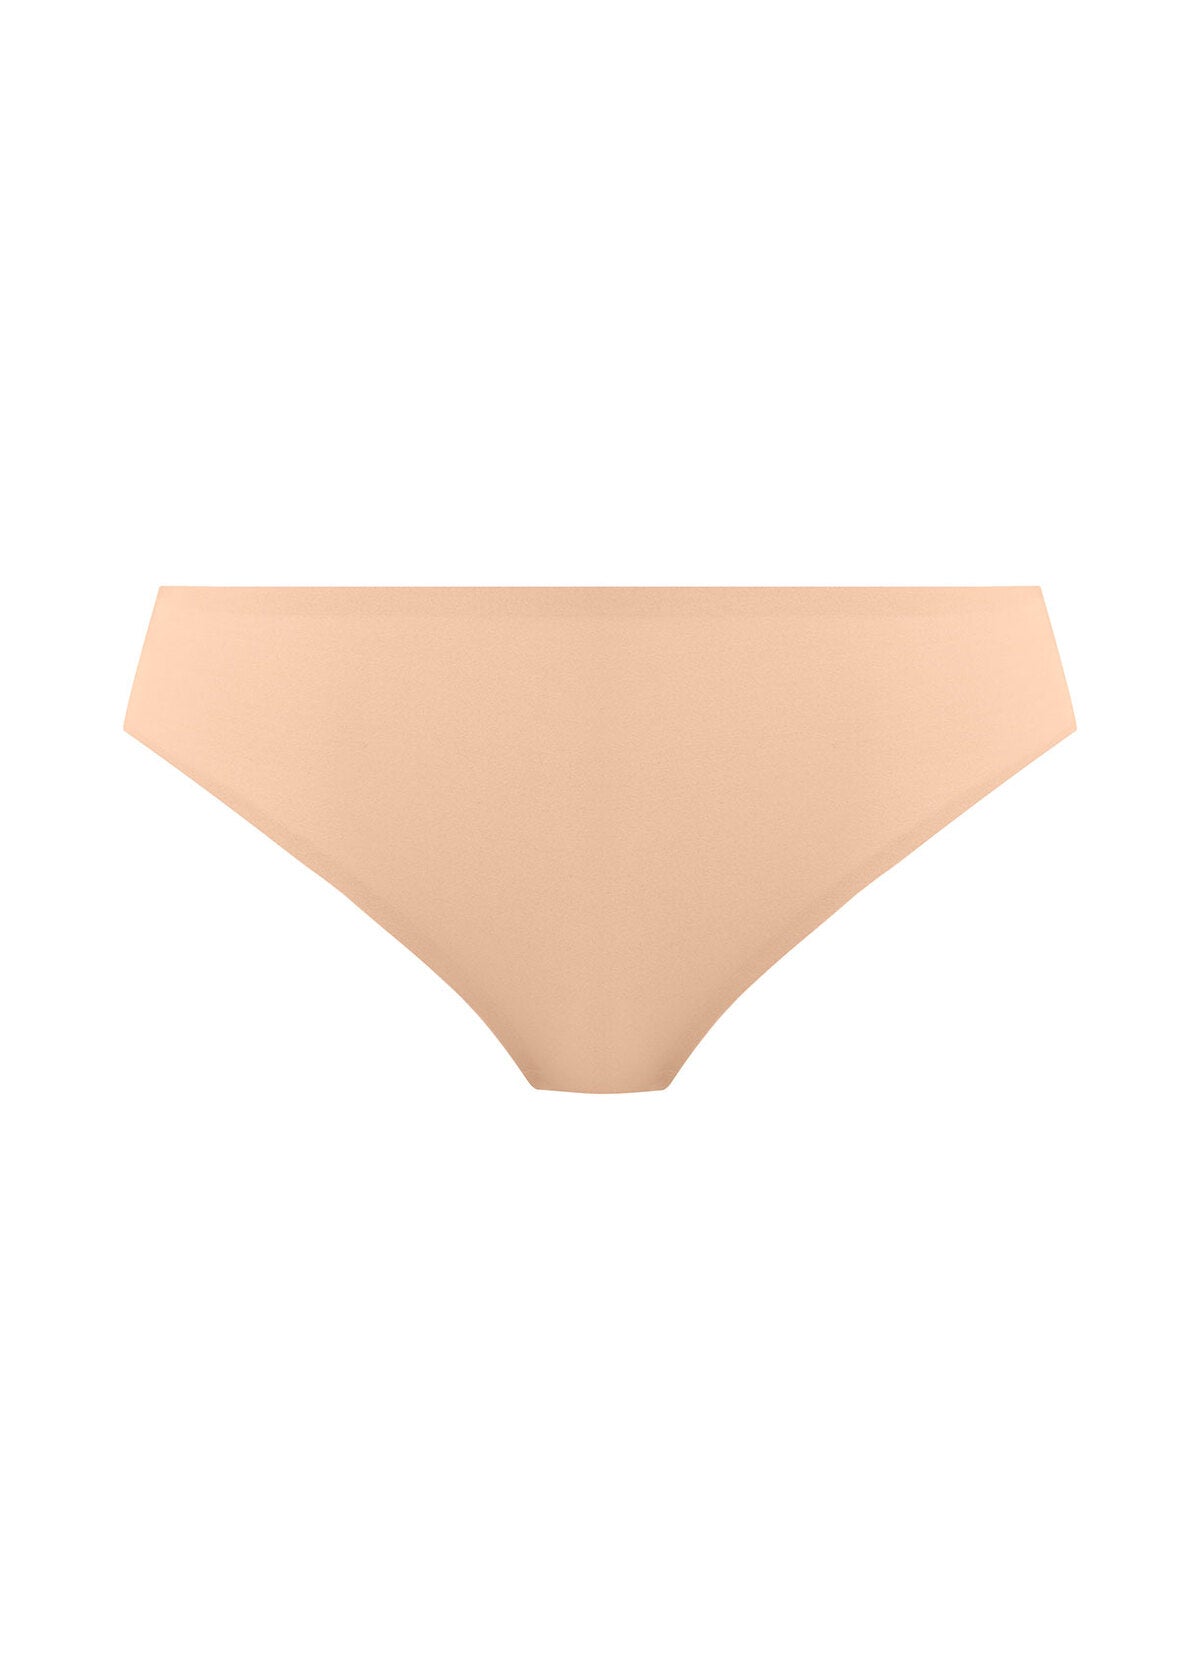 Lace Ease Invisible Stretch Thong In Natural Beige - Fantasie